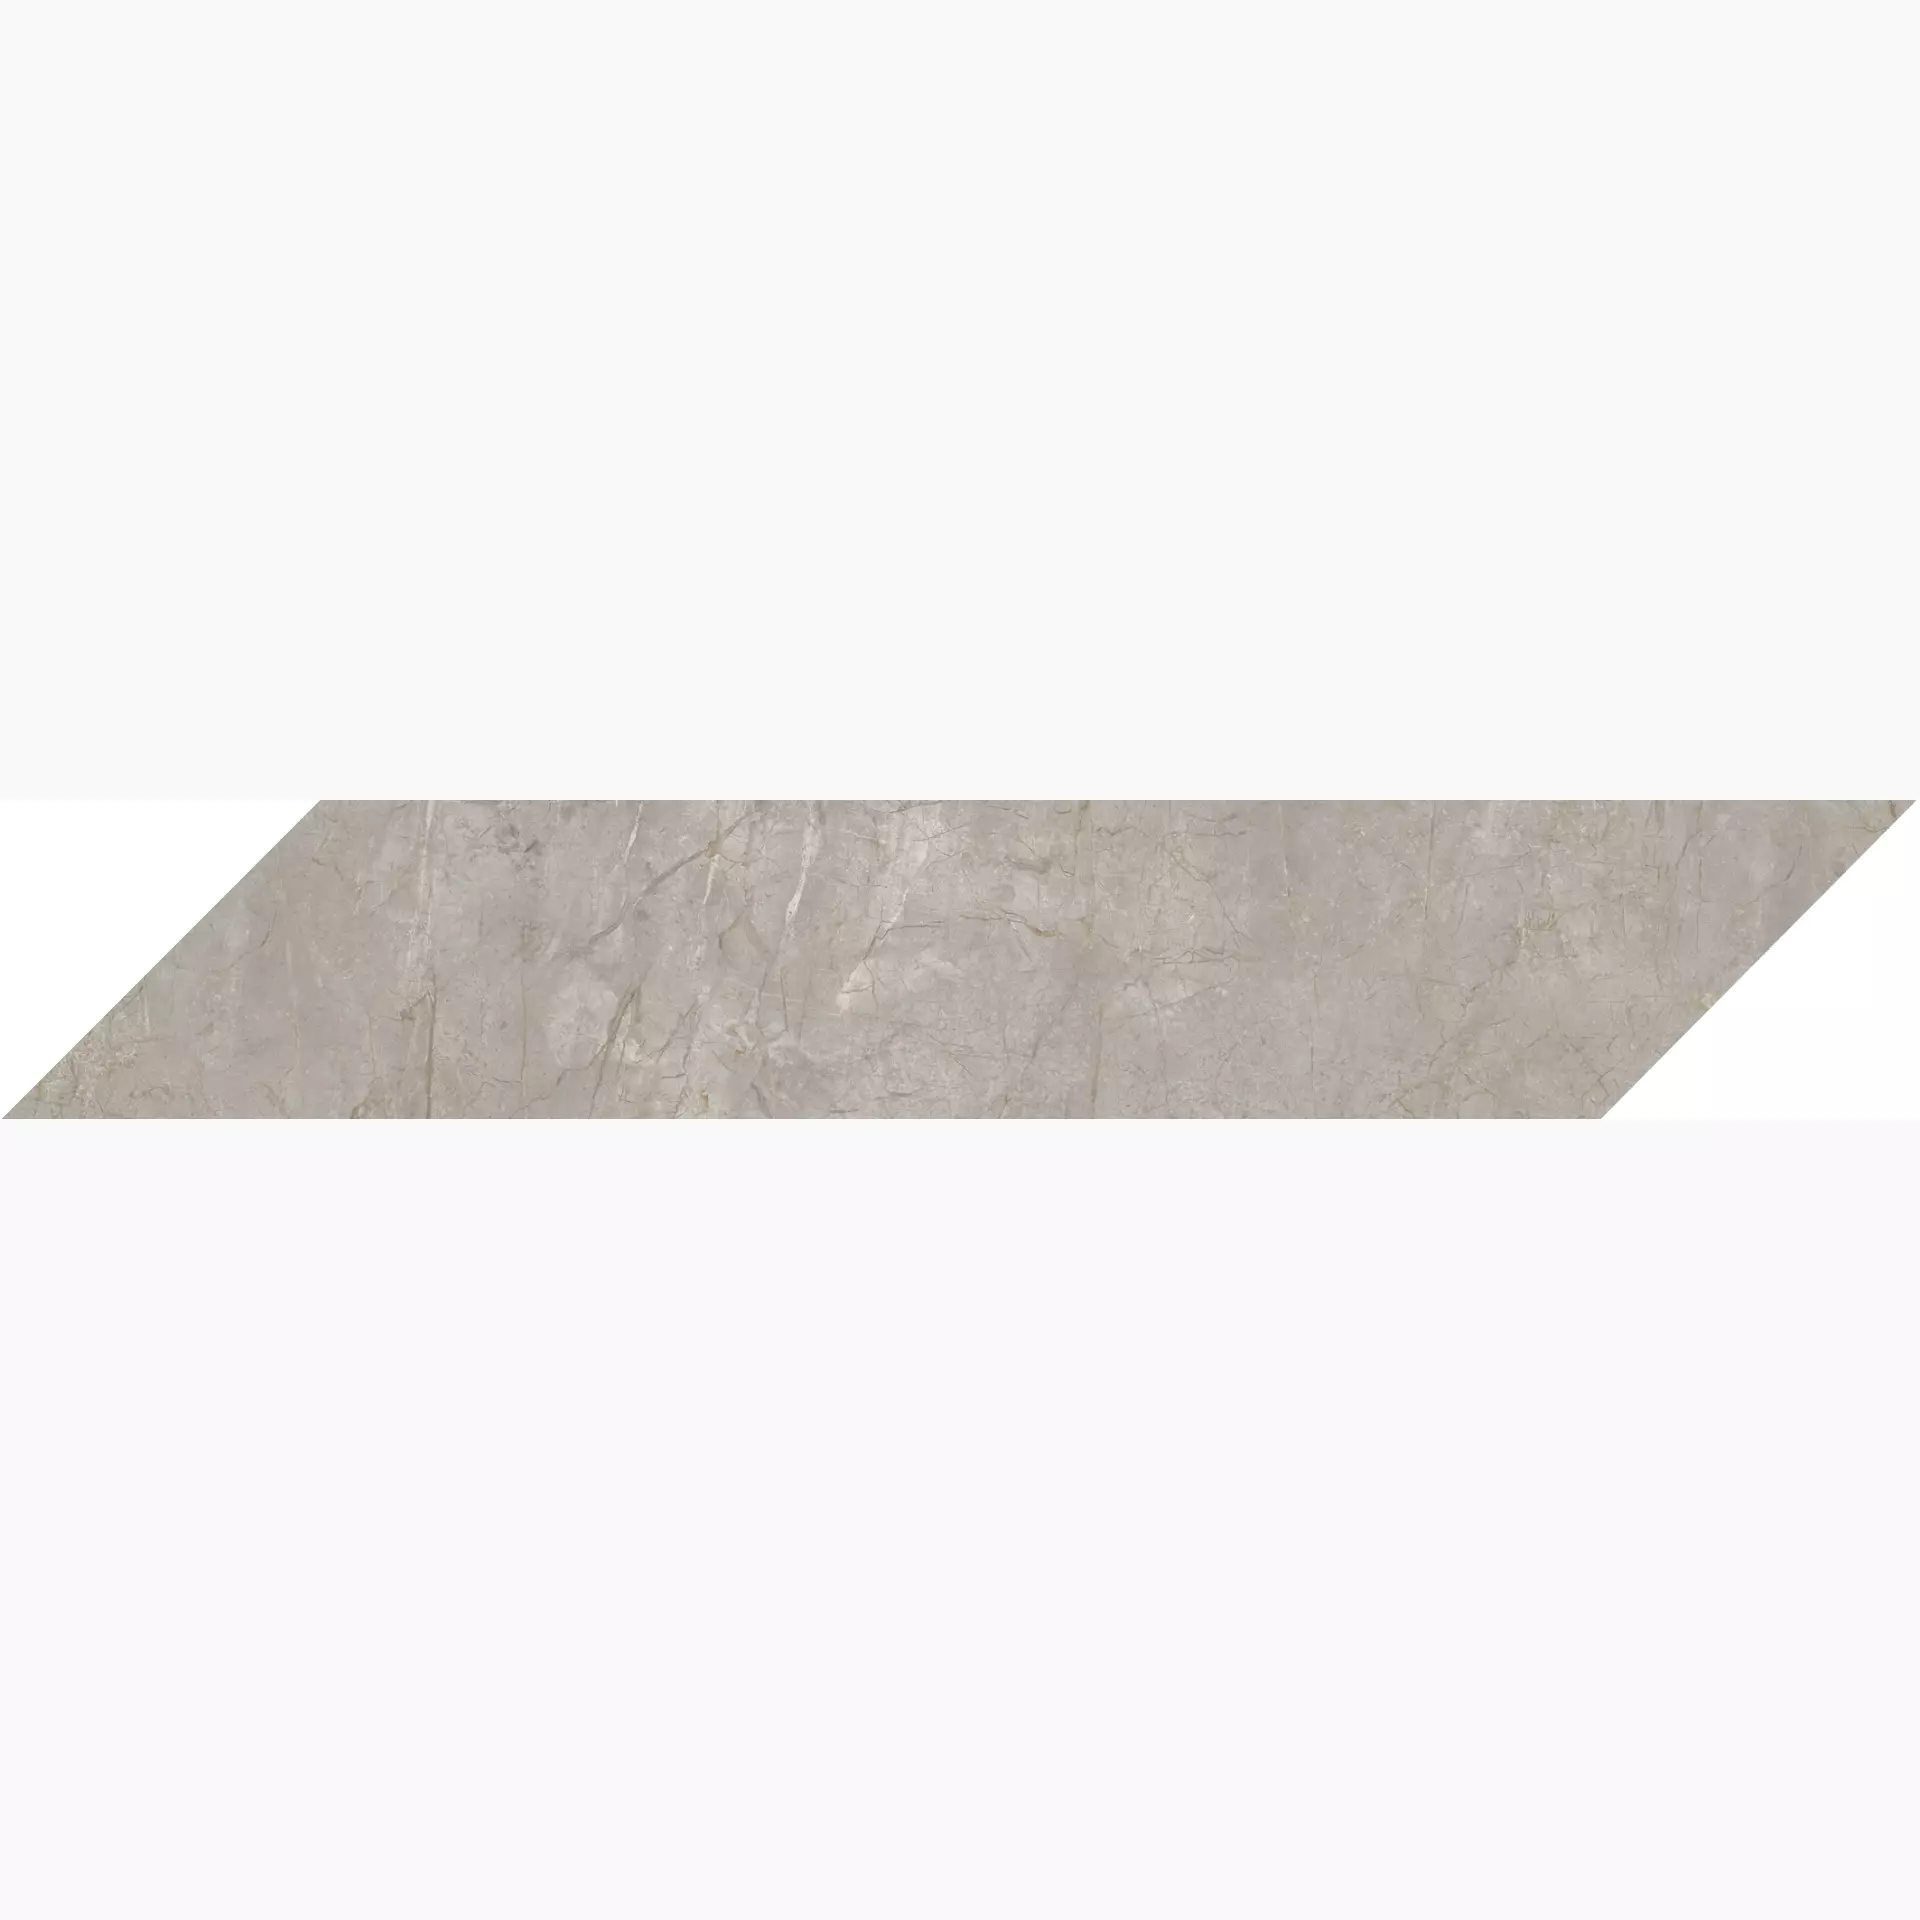 Keope Elements Lux Silver Grey Lappato Chevron Right 41325432 10x60cm rectified 9mm